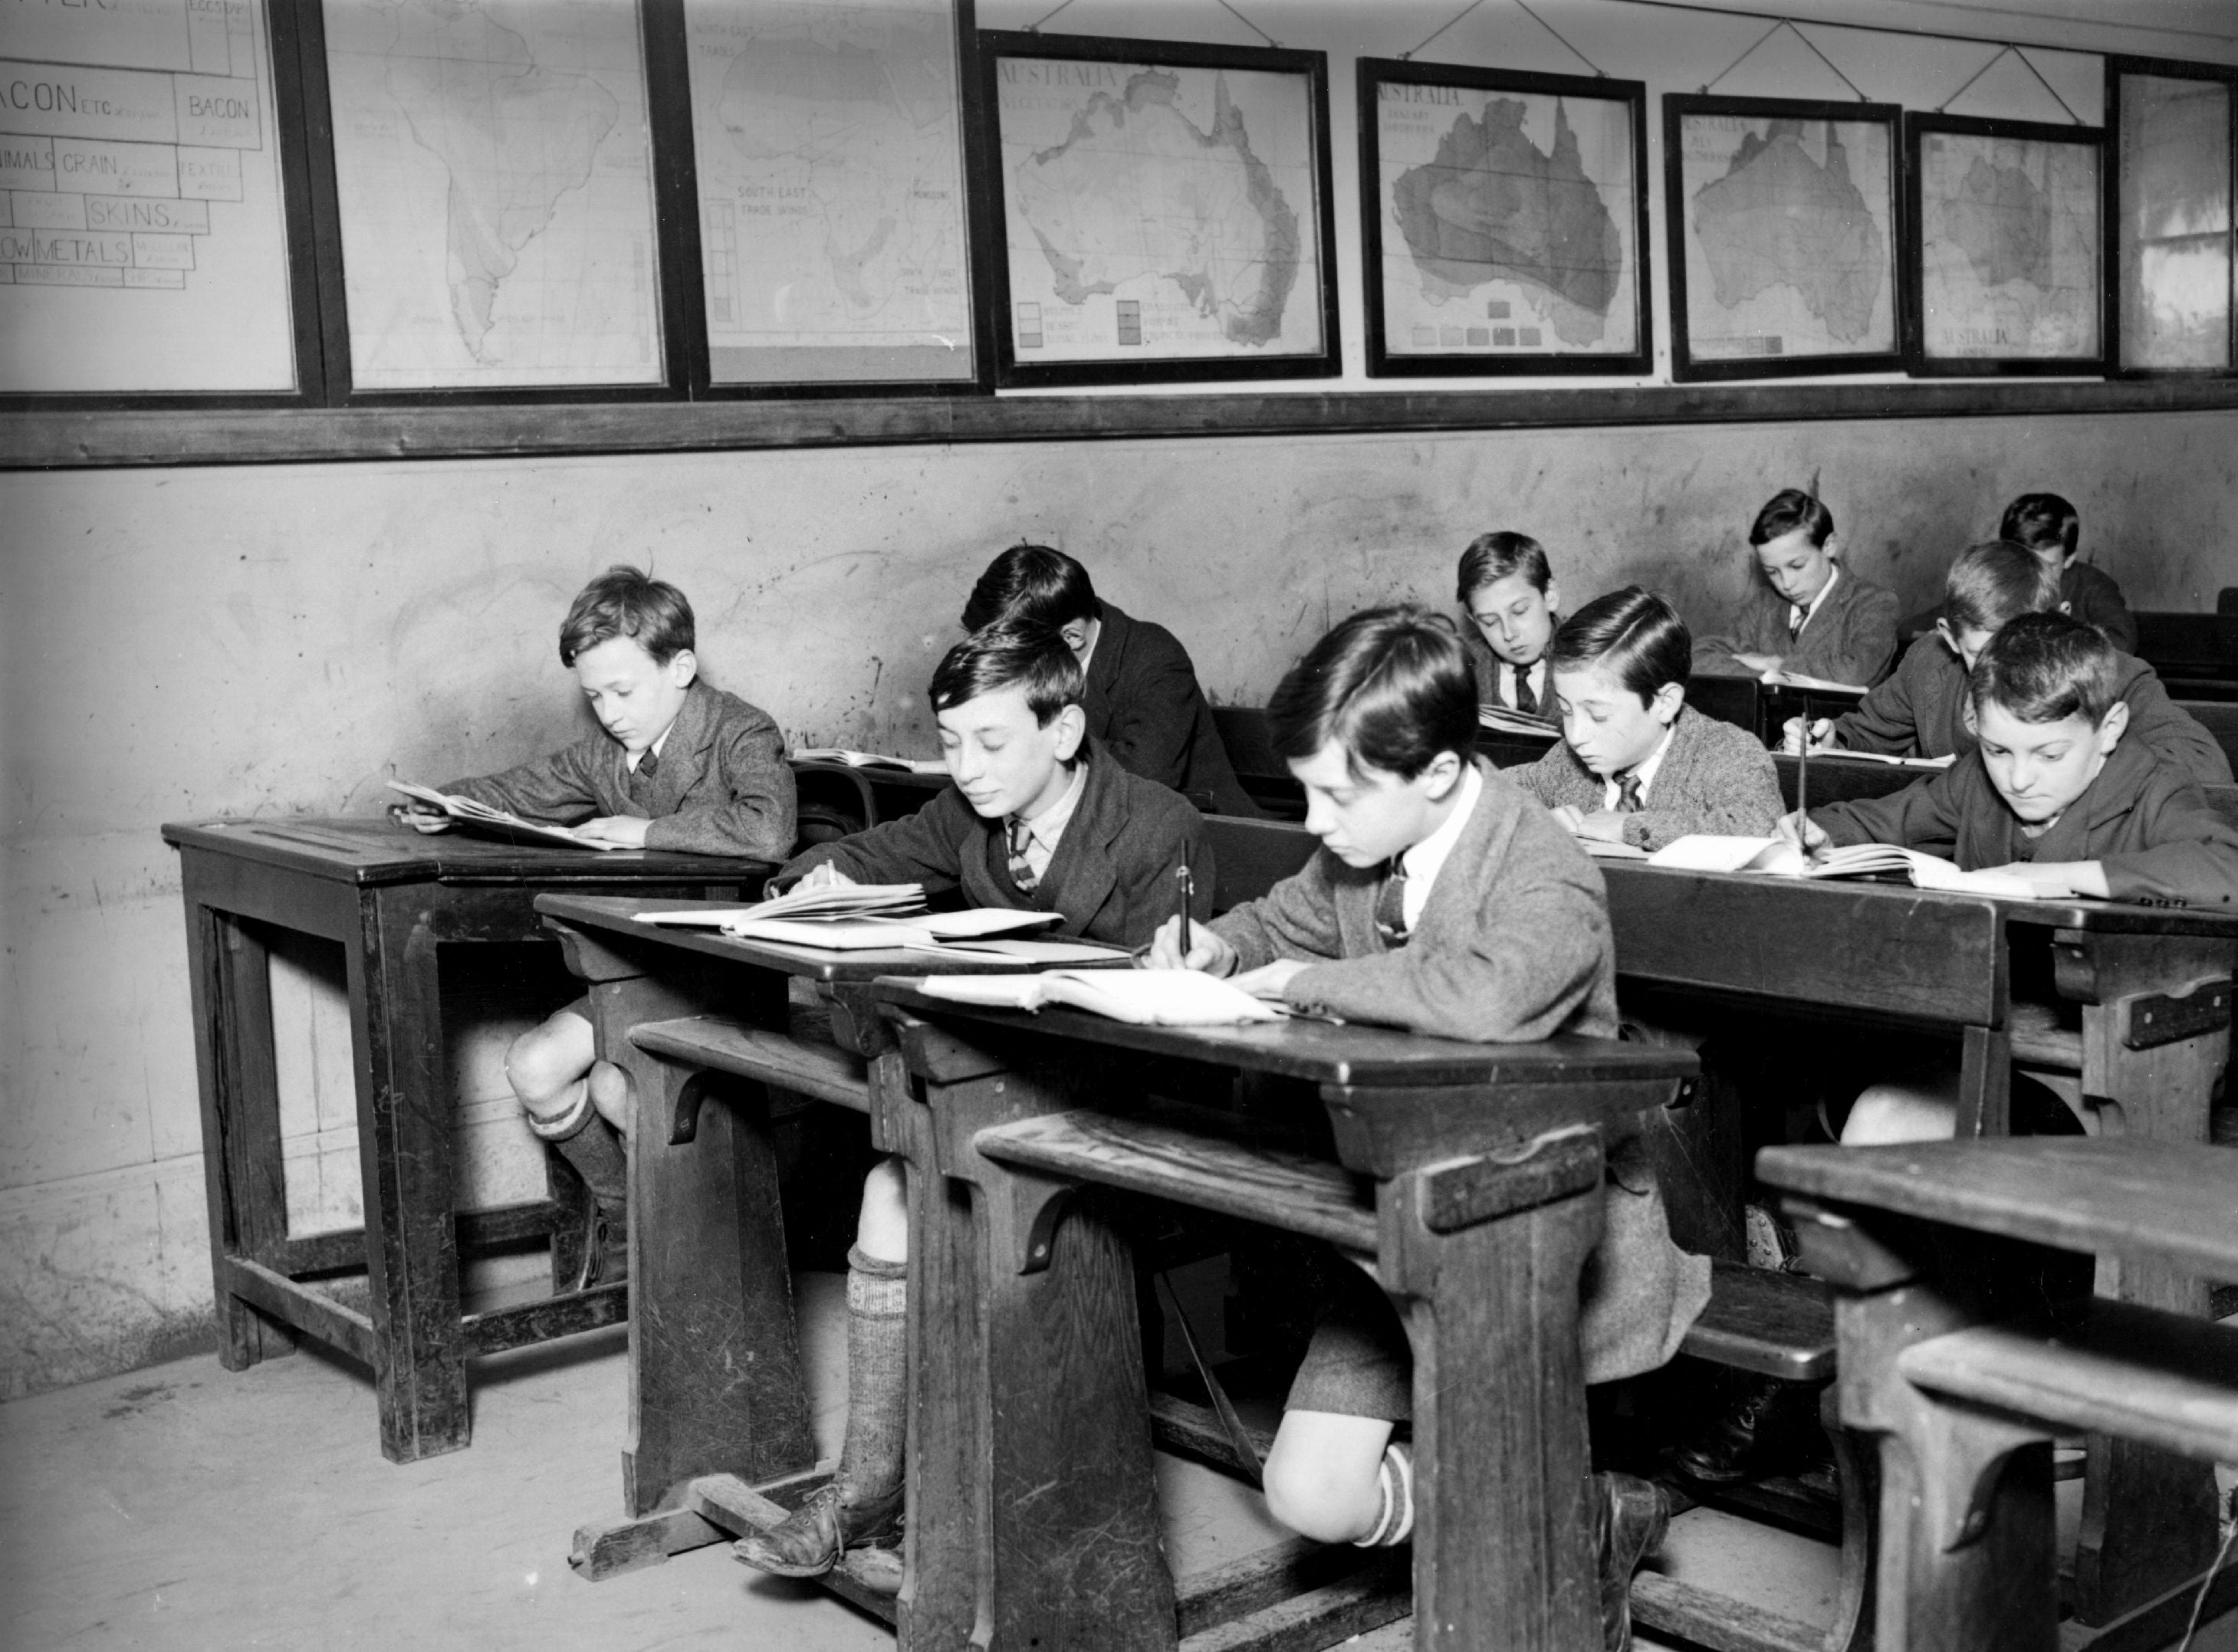 May 1922: Boys at work in their classroom. (Photo by Topical Press Agency/Getty Images)